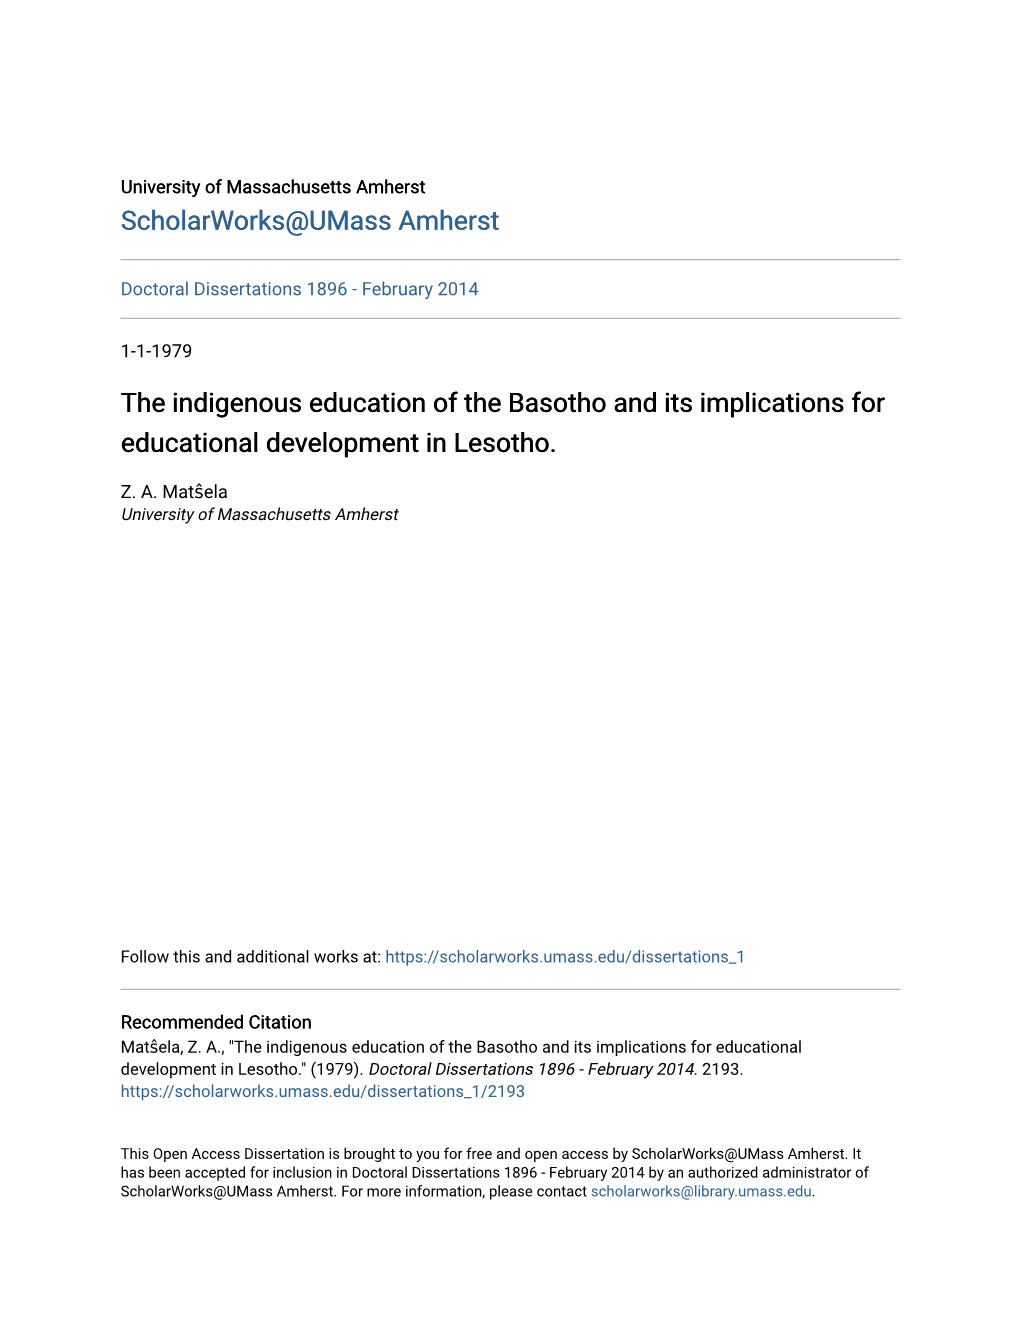 The Indigenous Education of the Basotho and Its Implications for Educational Development in Lesotho